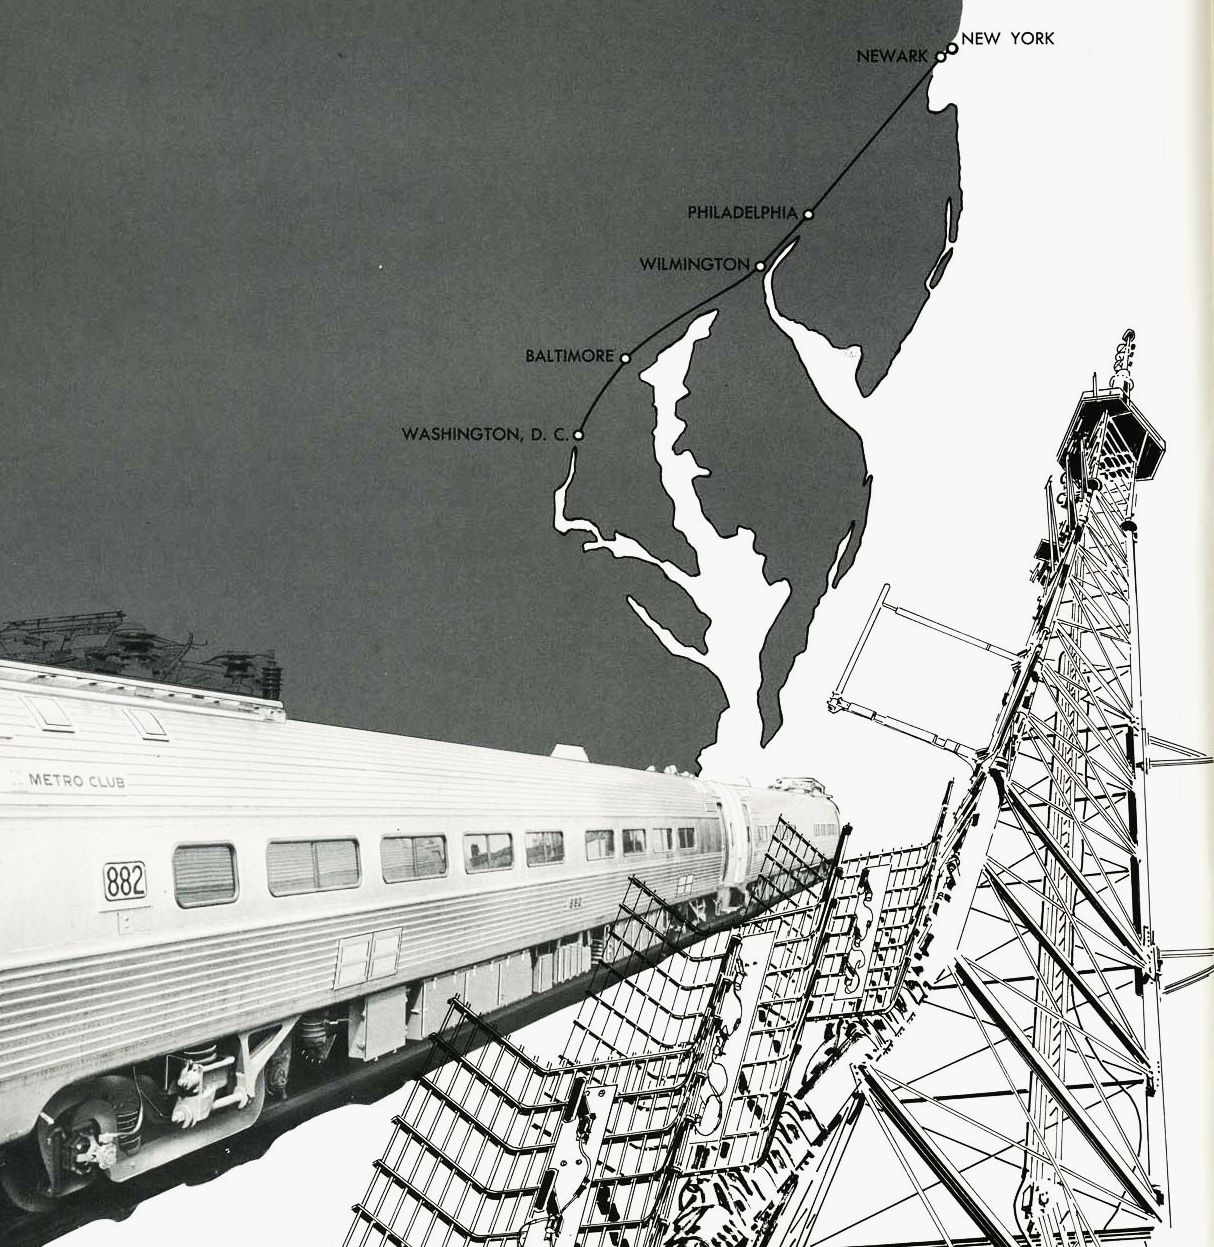 In 1969 the Bell System installed telephones on the Penn Central?s Metroliner. The New York-Washington route was divided into nine cells, from which calls could be made to anywhere.